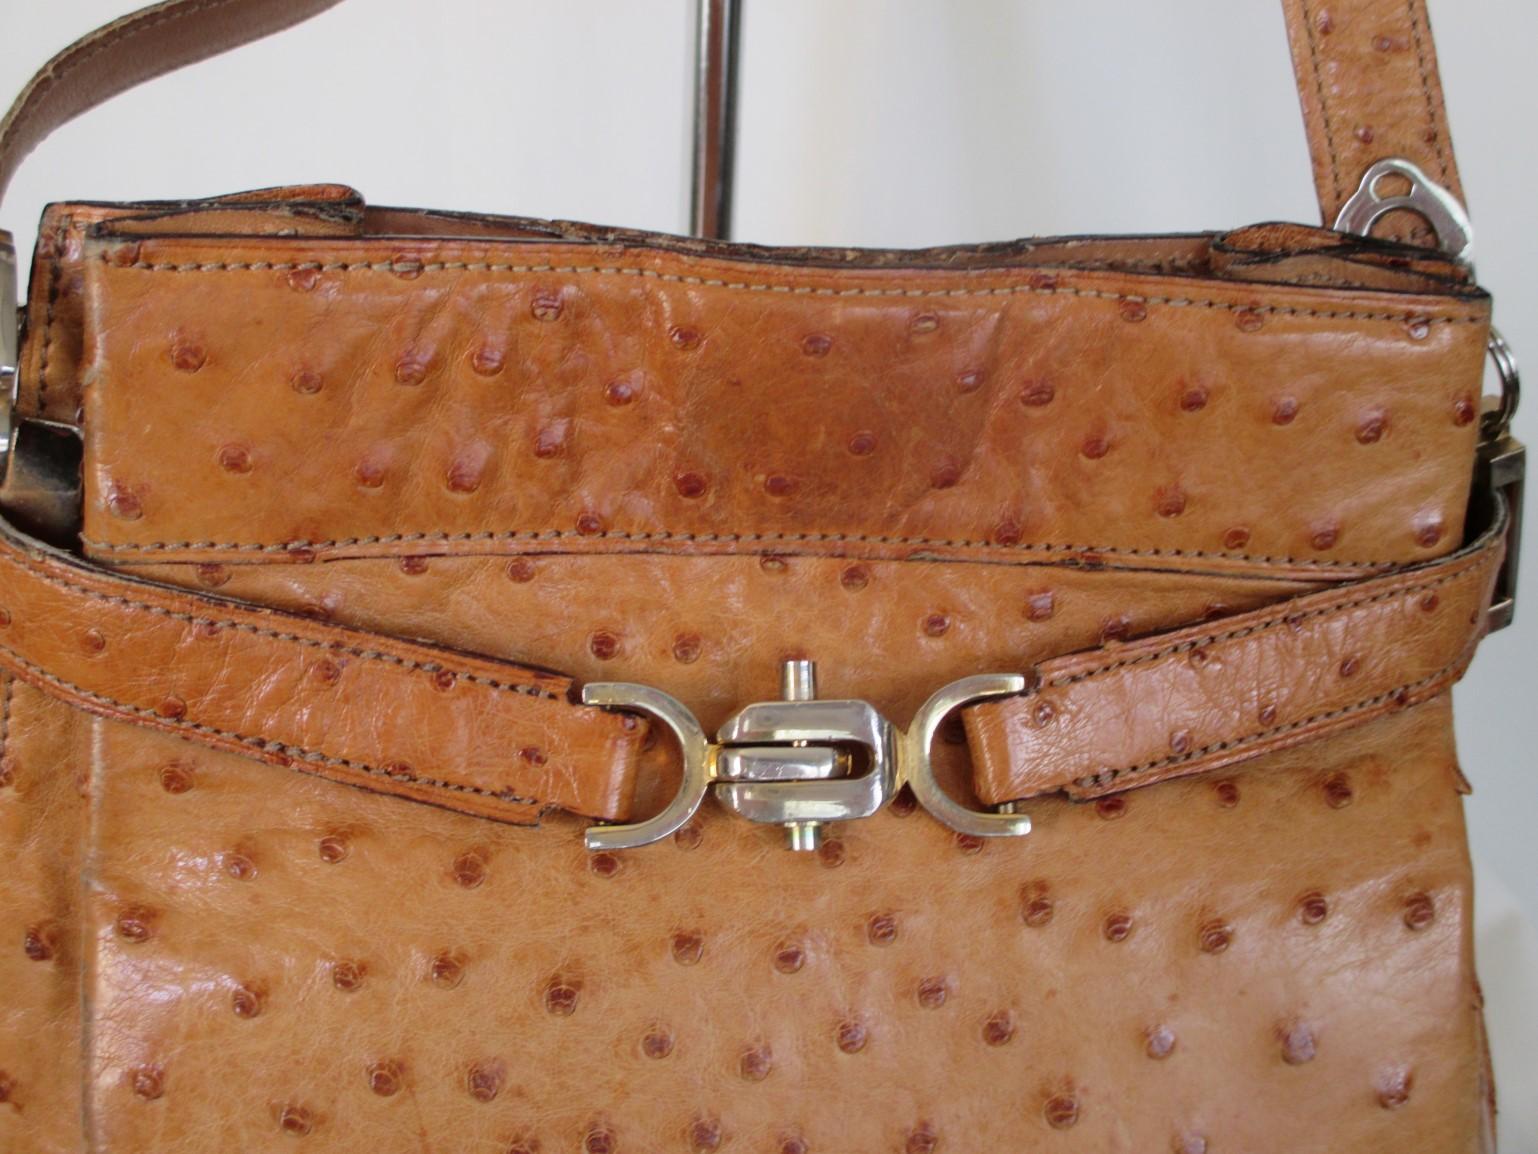 Rare vintage ostrich leather shoulder bag. 
This bag is made of cognac color ostrich leather with gold hardware and a front closure.
The lining is leather has 1 zip pocket and closes with a push-button inside.
This bag is worn and have some spots on